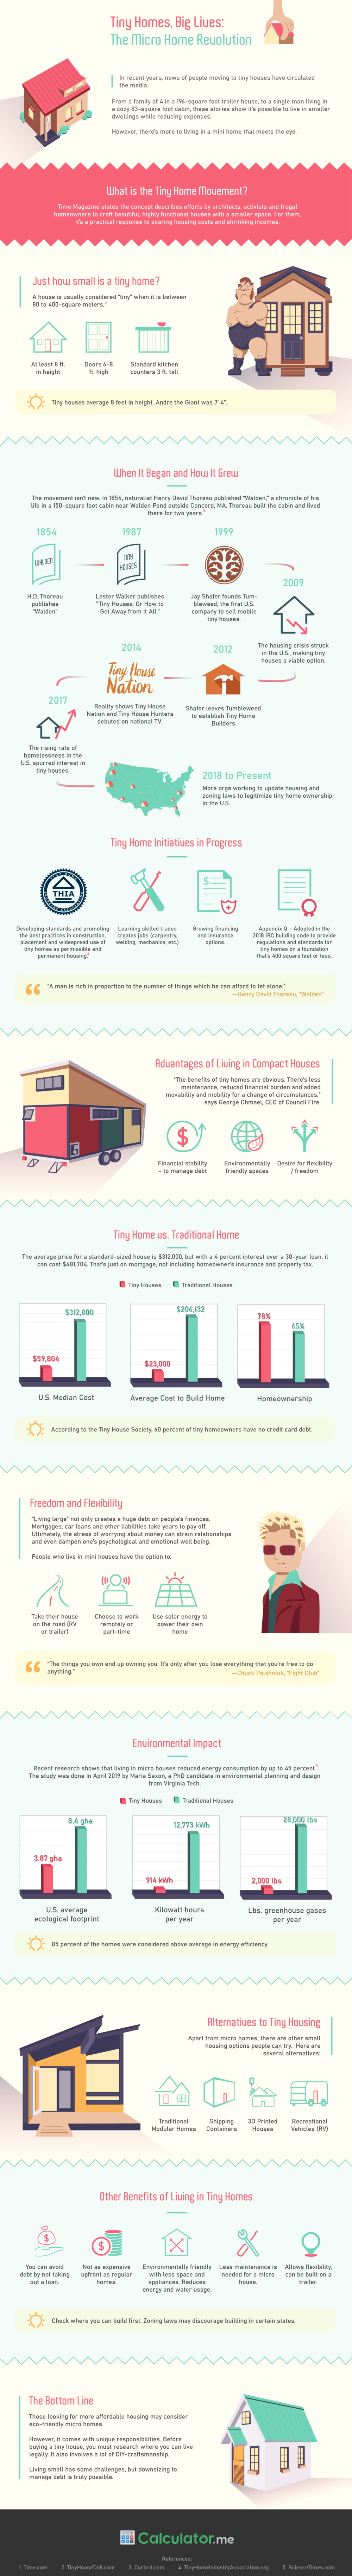 A Guide to Understanding the Tiny Homes Movement